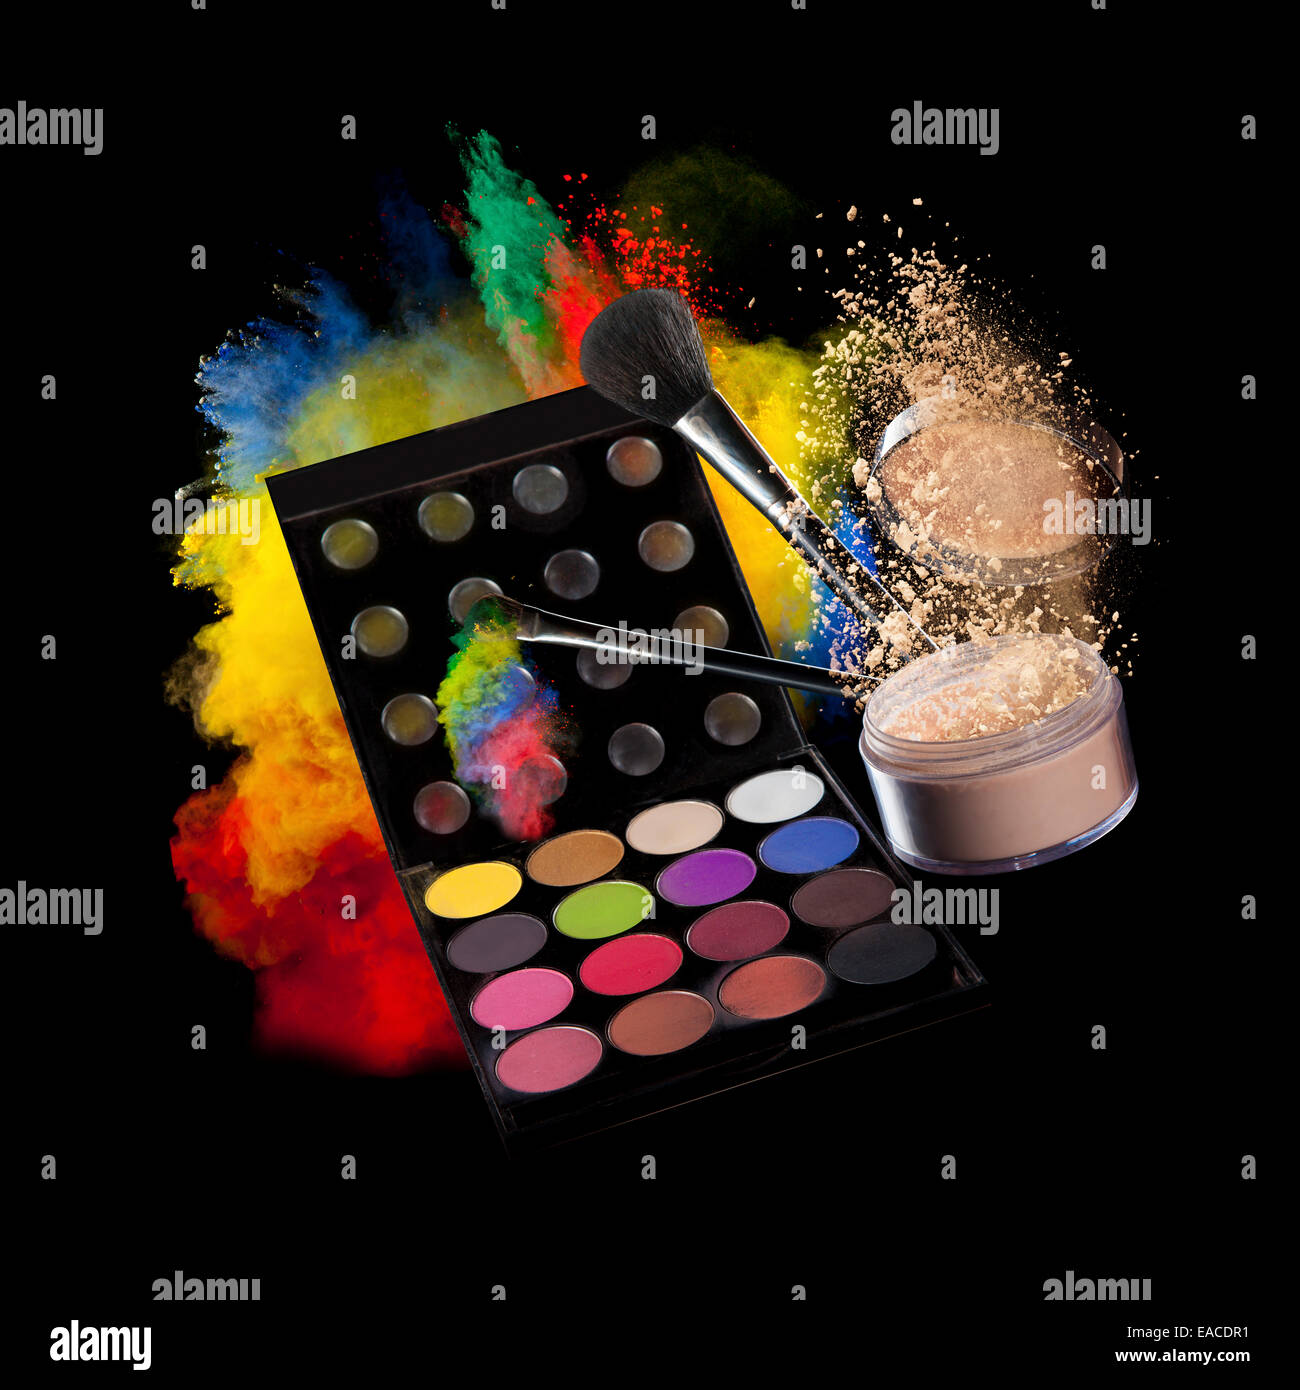 Freeze motion of colored dust explosion make-up palette and brushes, isolated on black background Stock Photo